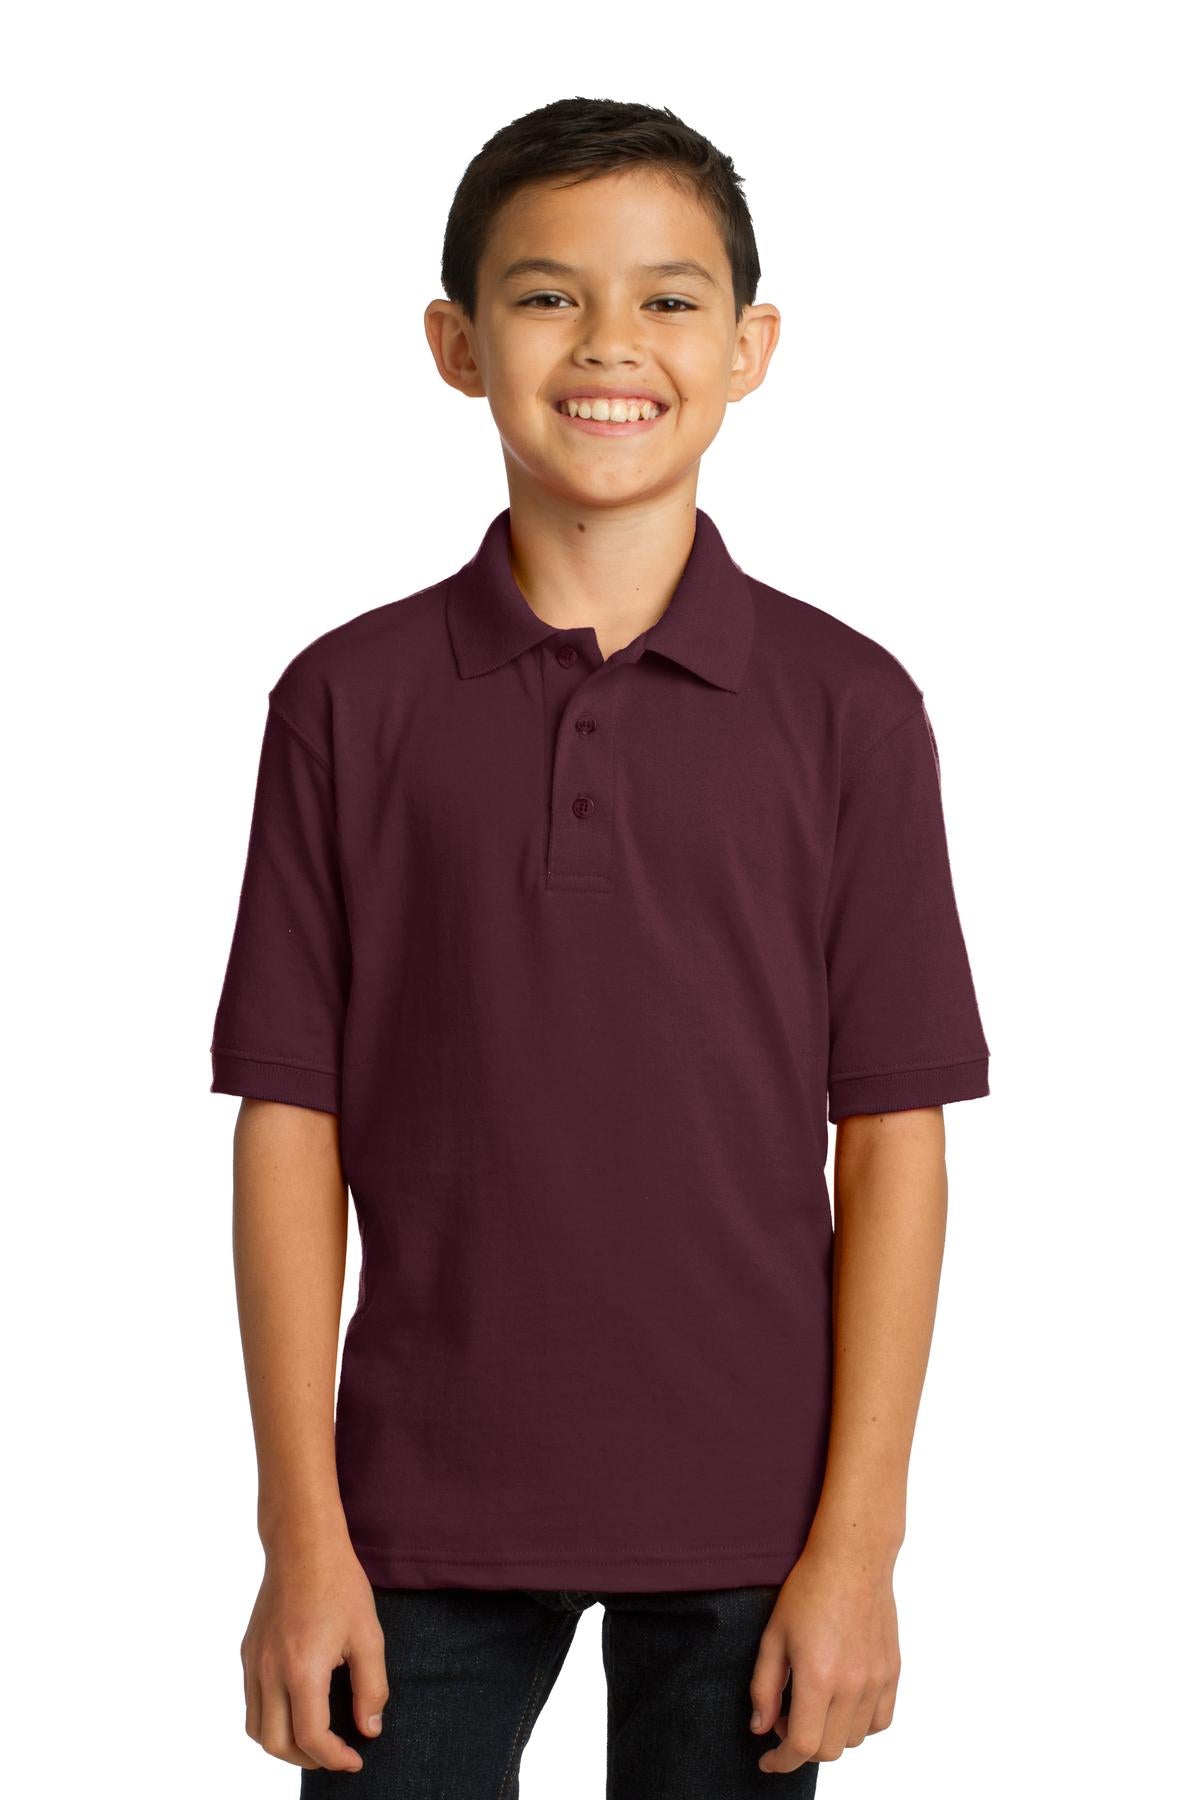 Port & Company® Youth Core Blend Jersey Knit Polo. KP55Y - DFW Impression